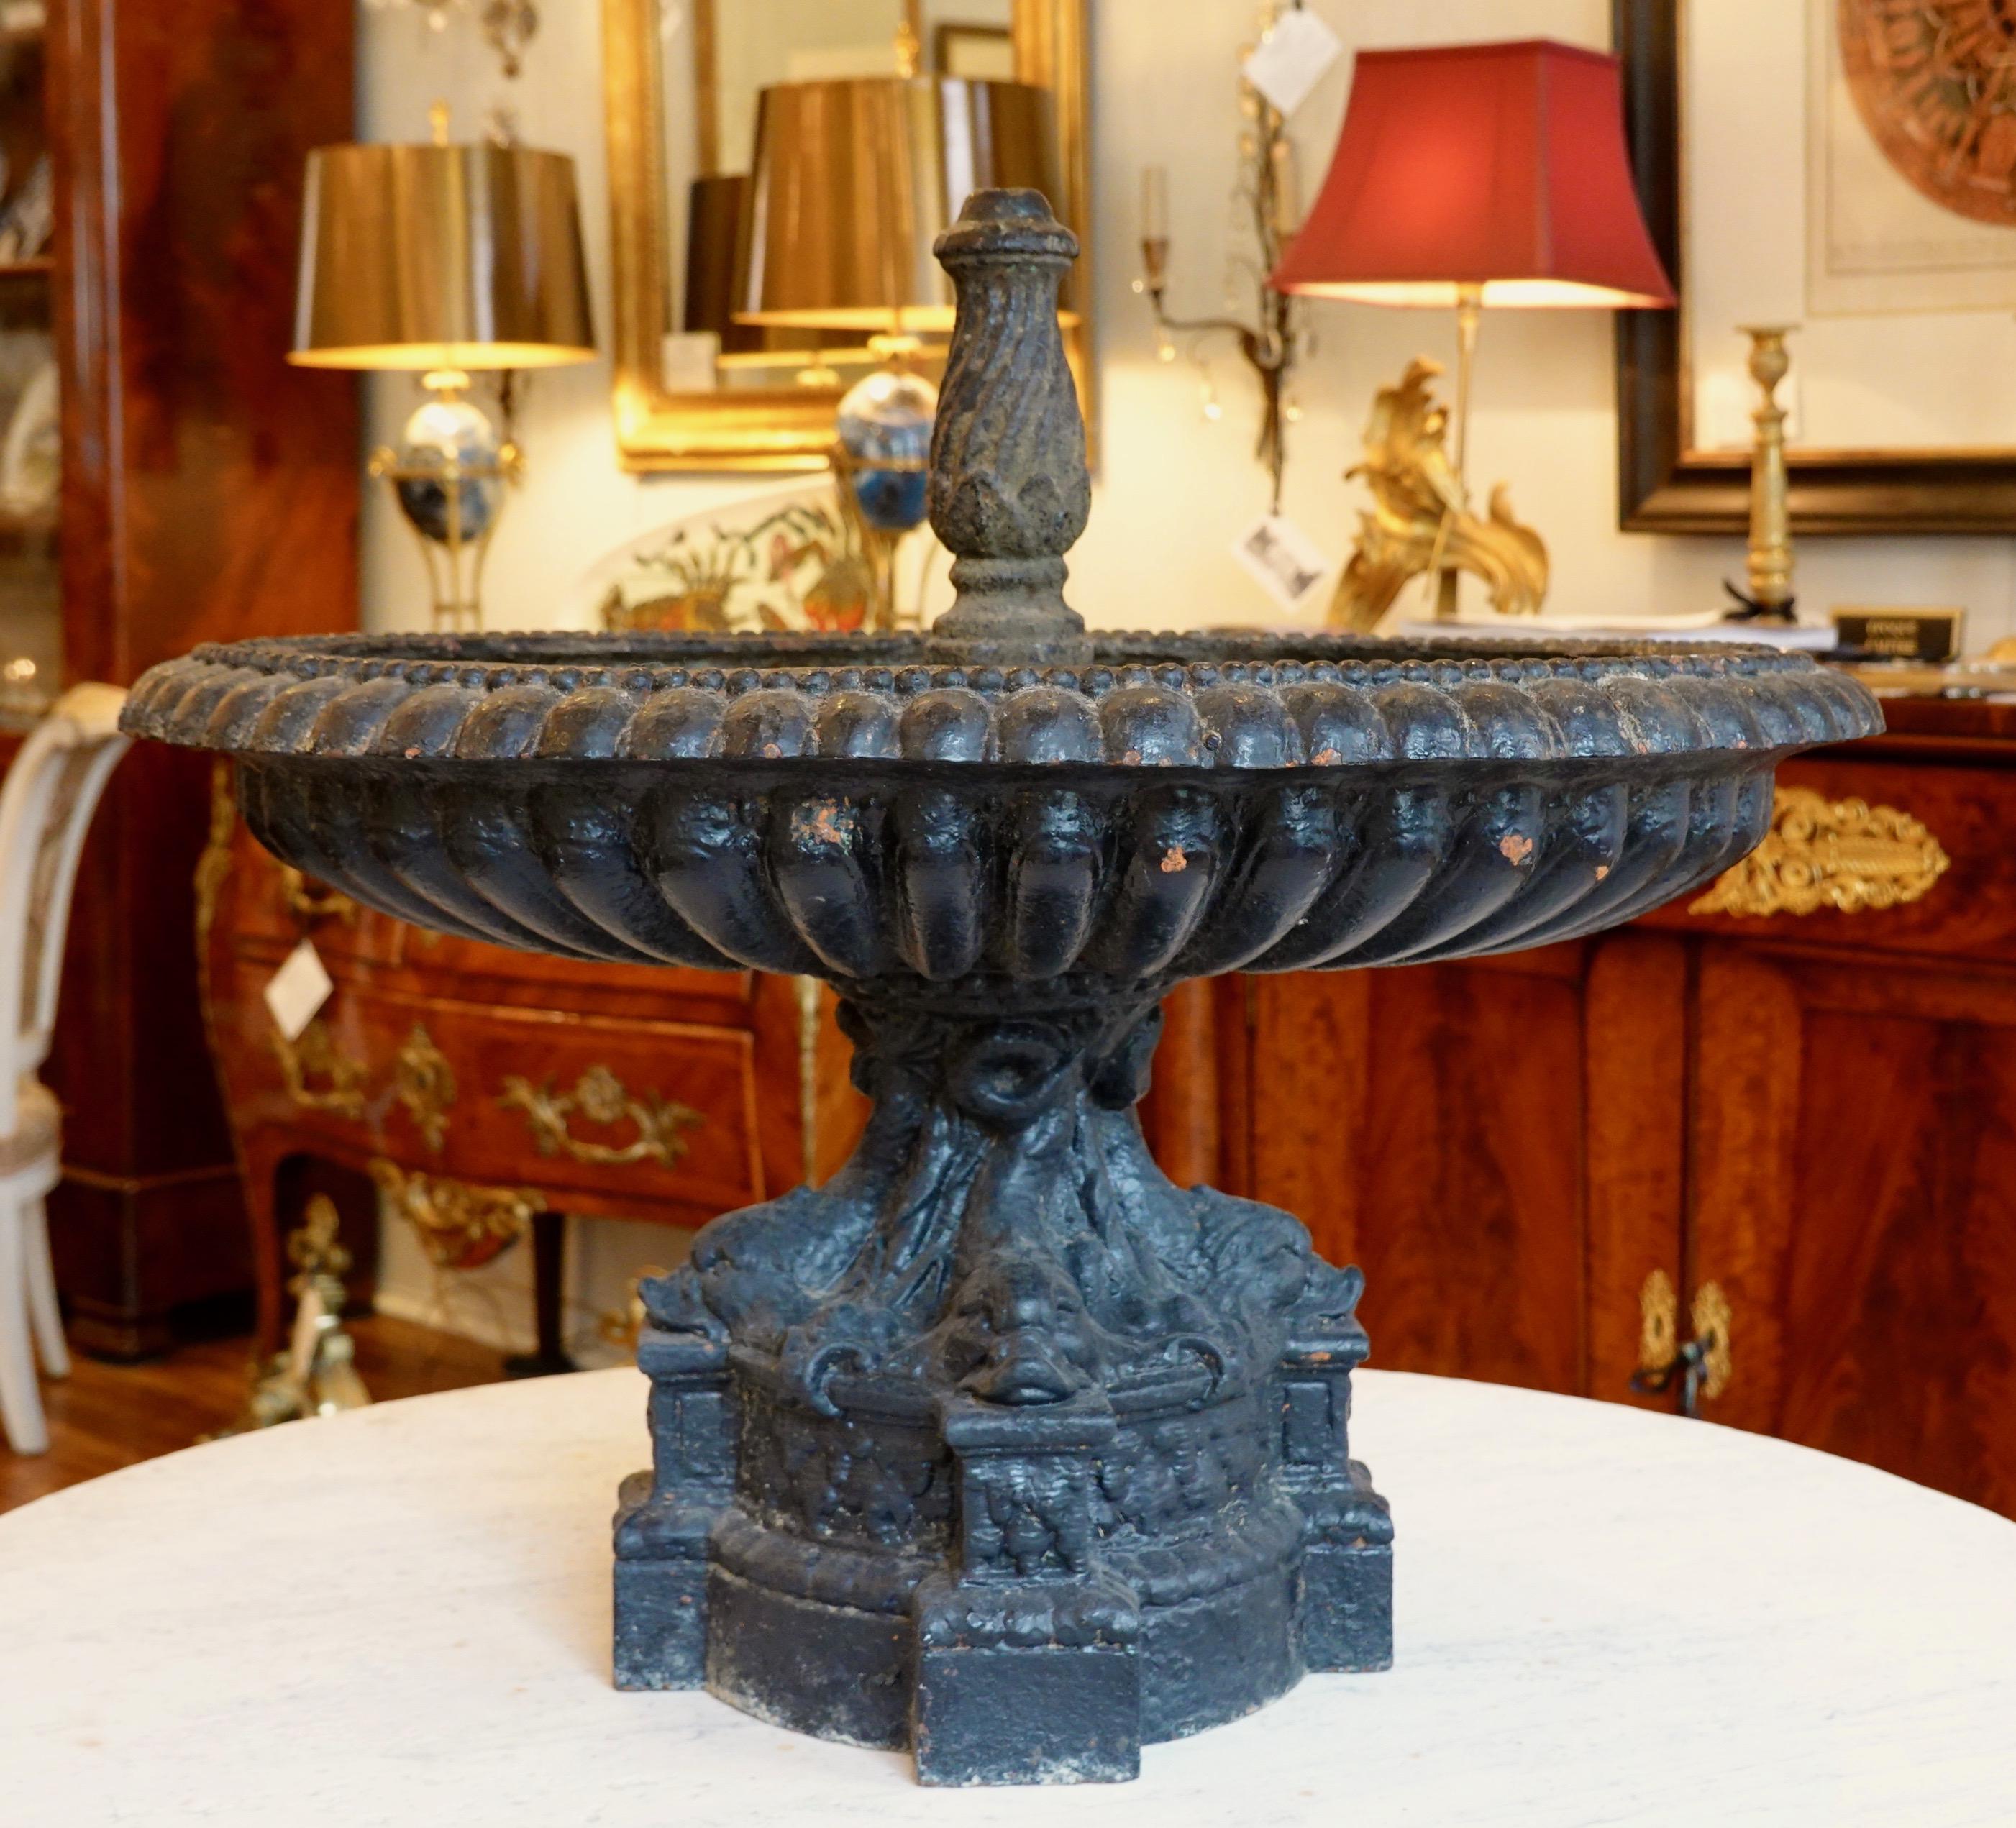 A rare and highly-decorative French cast iron fountain by the Val d'Osne Foundry. The oval tazza form bowl is lobed with pearl beads around the inner perimeter, and is supported on a base of four mythical dolphins. The fountain is depicted in the